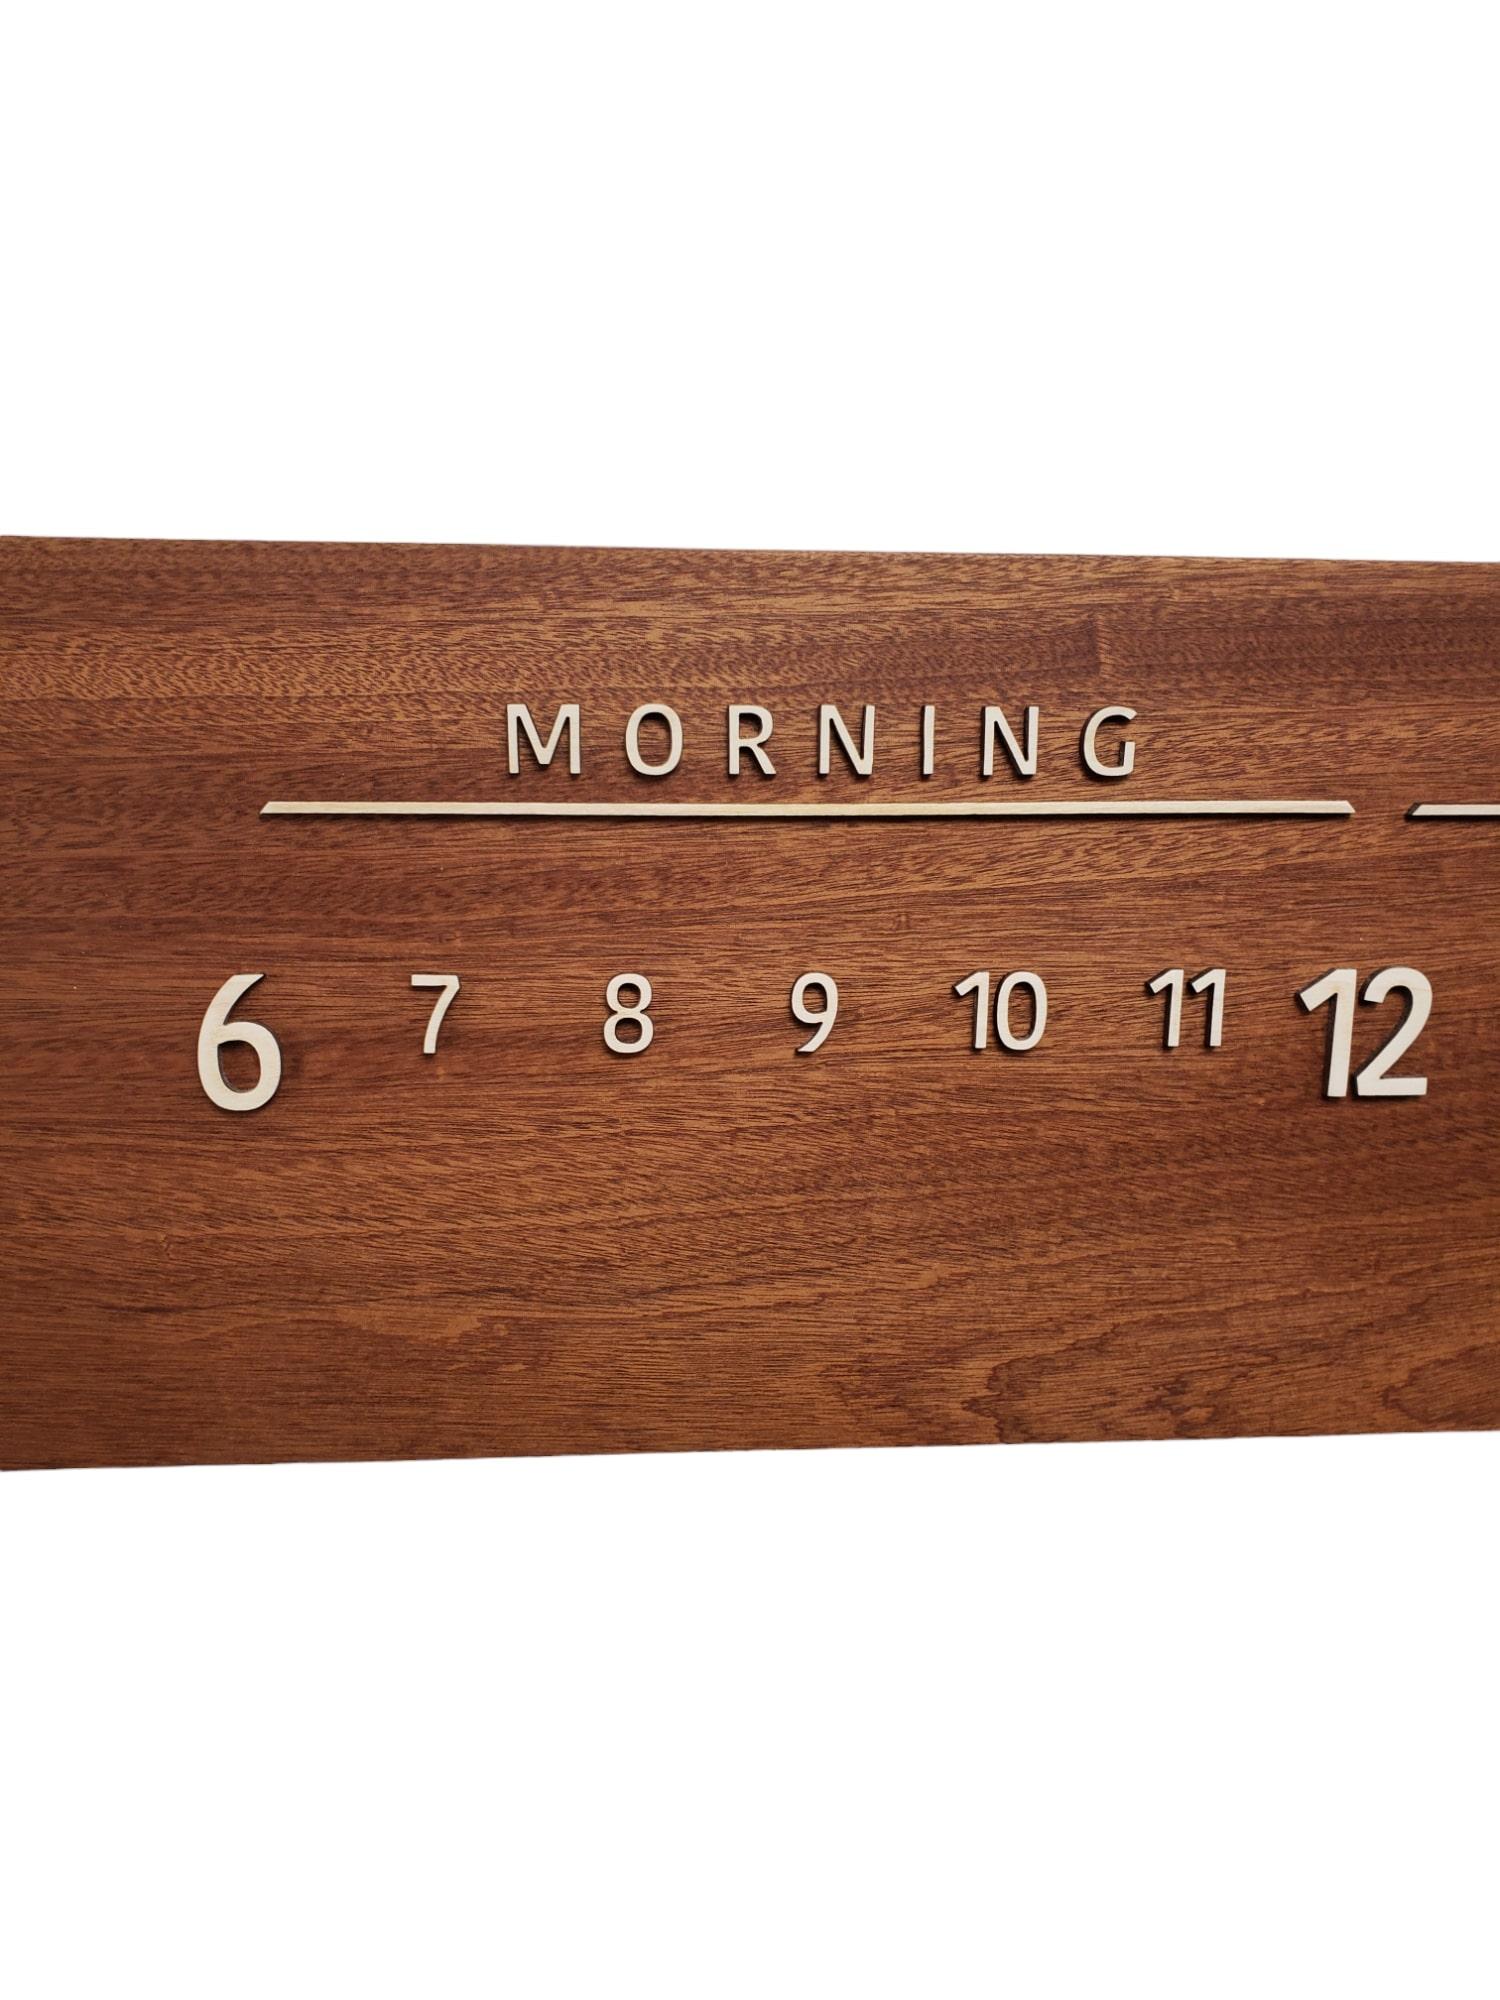 Hand-Crafted Vesuvius: 3-foot Sabele and Maple Linear Clock